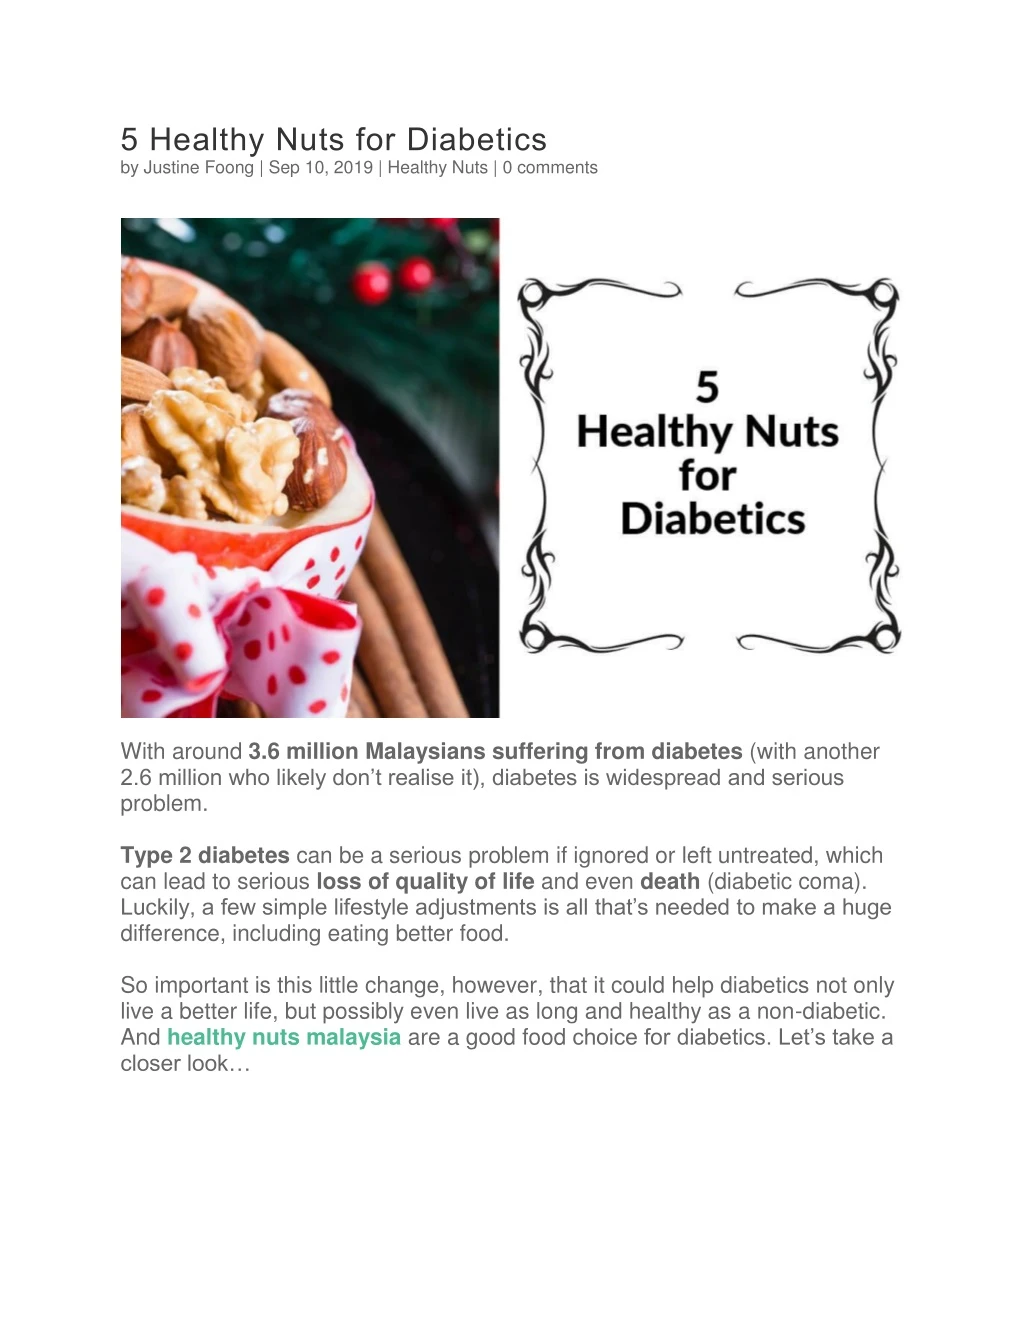 5 healthy nuts for diabetics by justine foong